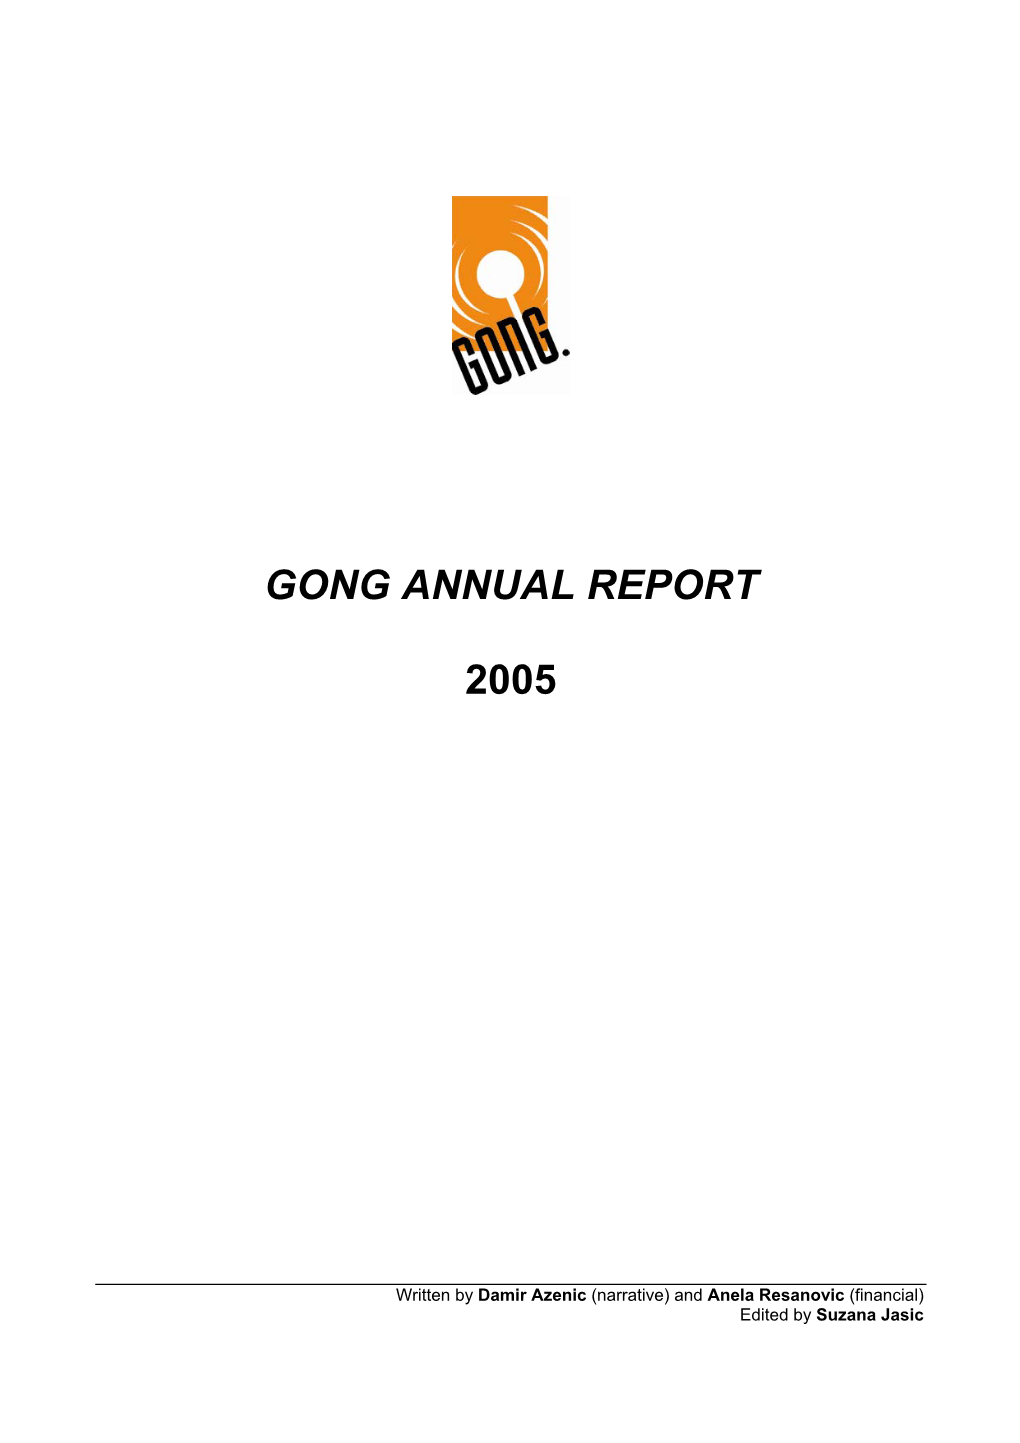 Gong Annual Report 2005